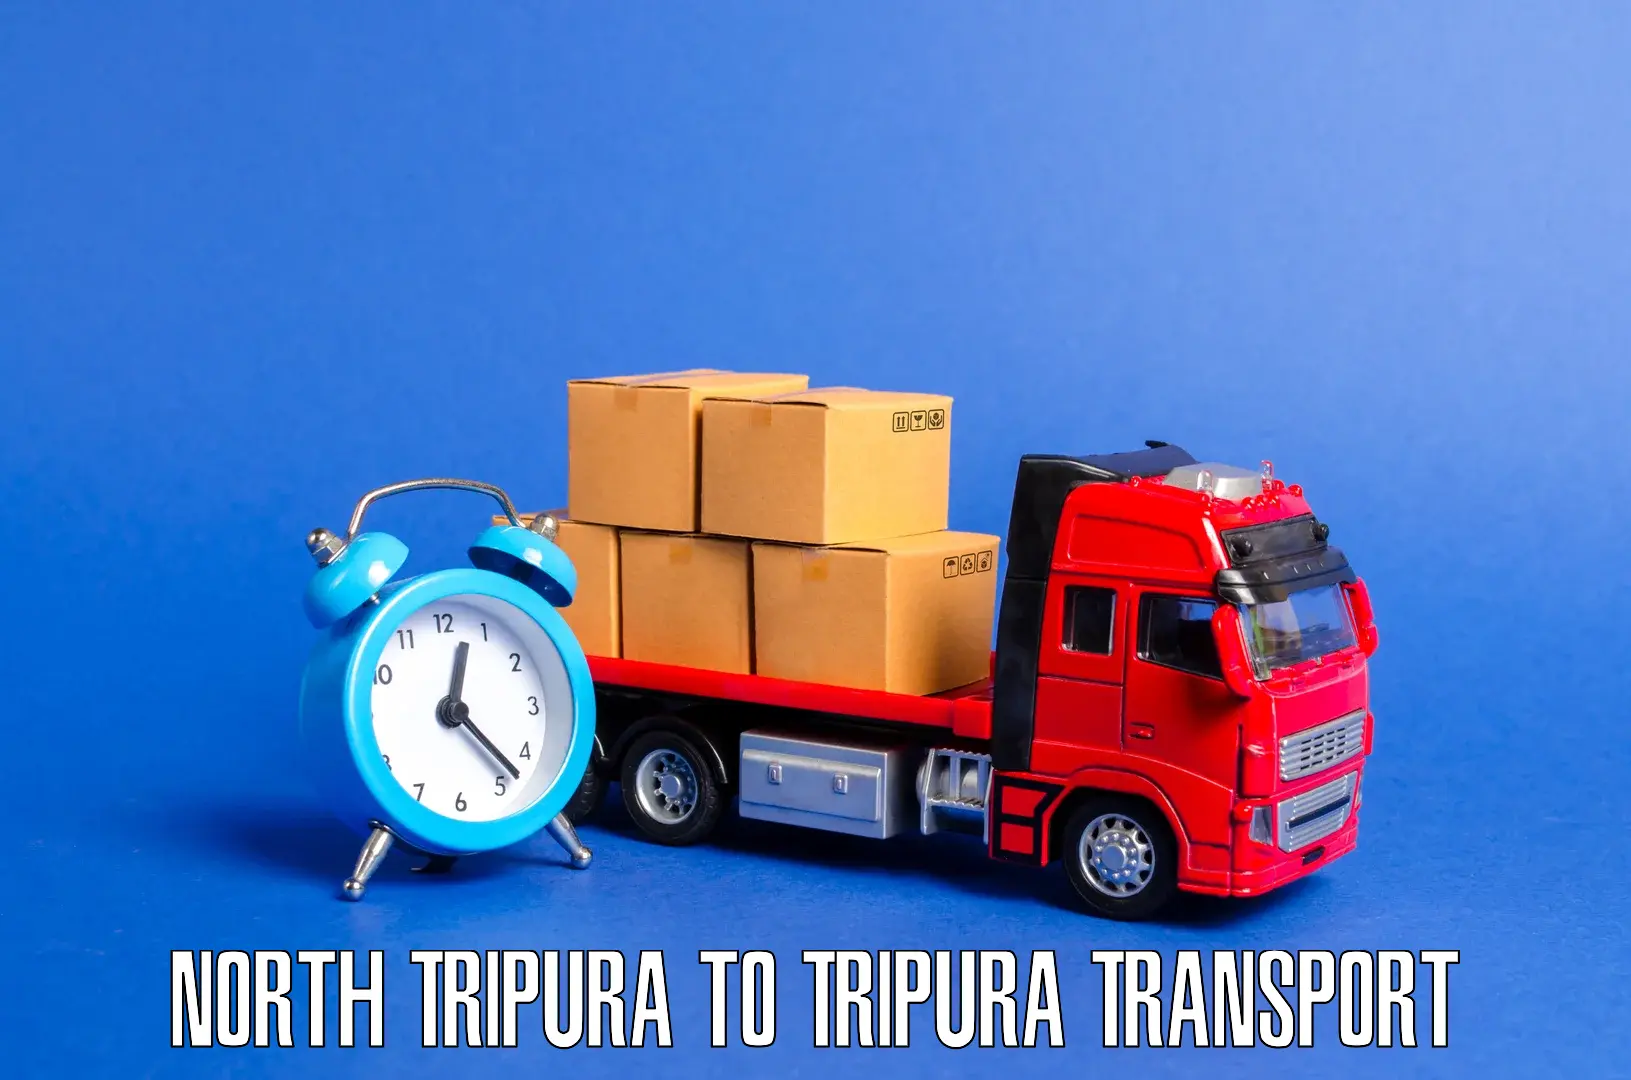 Transport bike from one state to another North Tripura to Udaipur Tripura